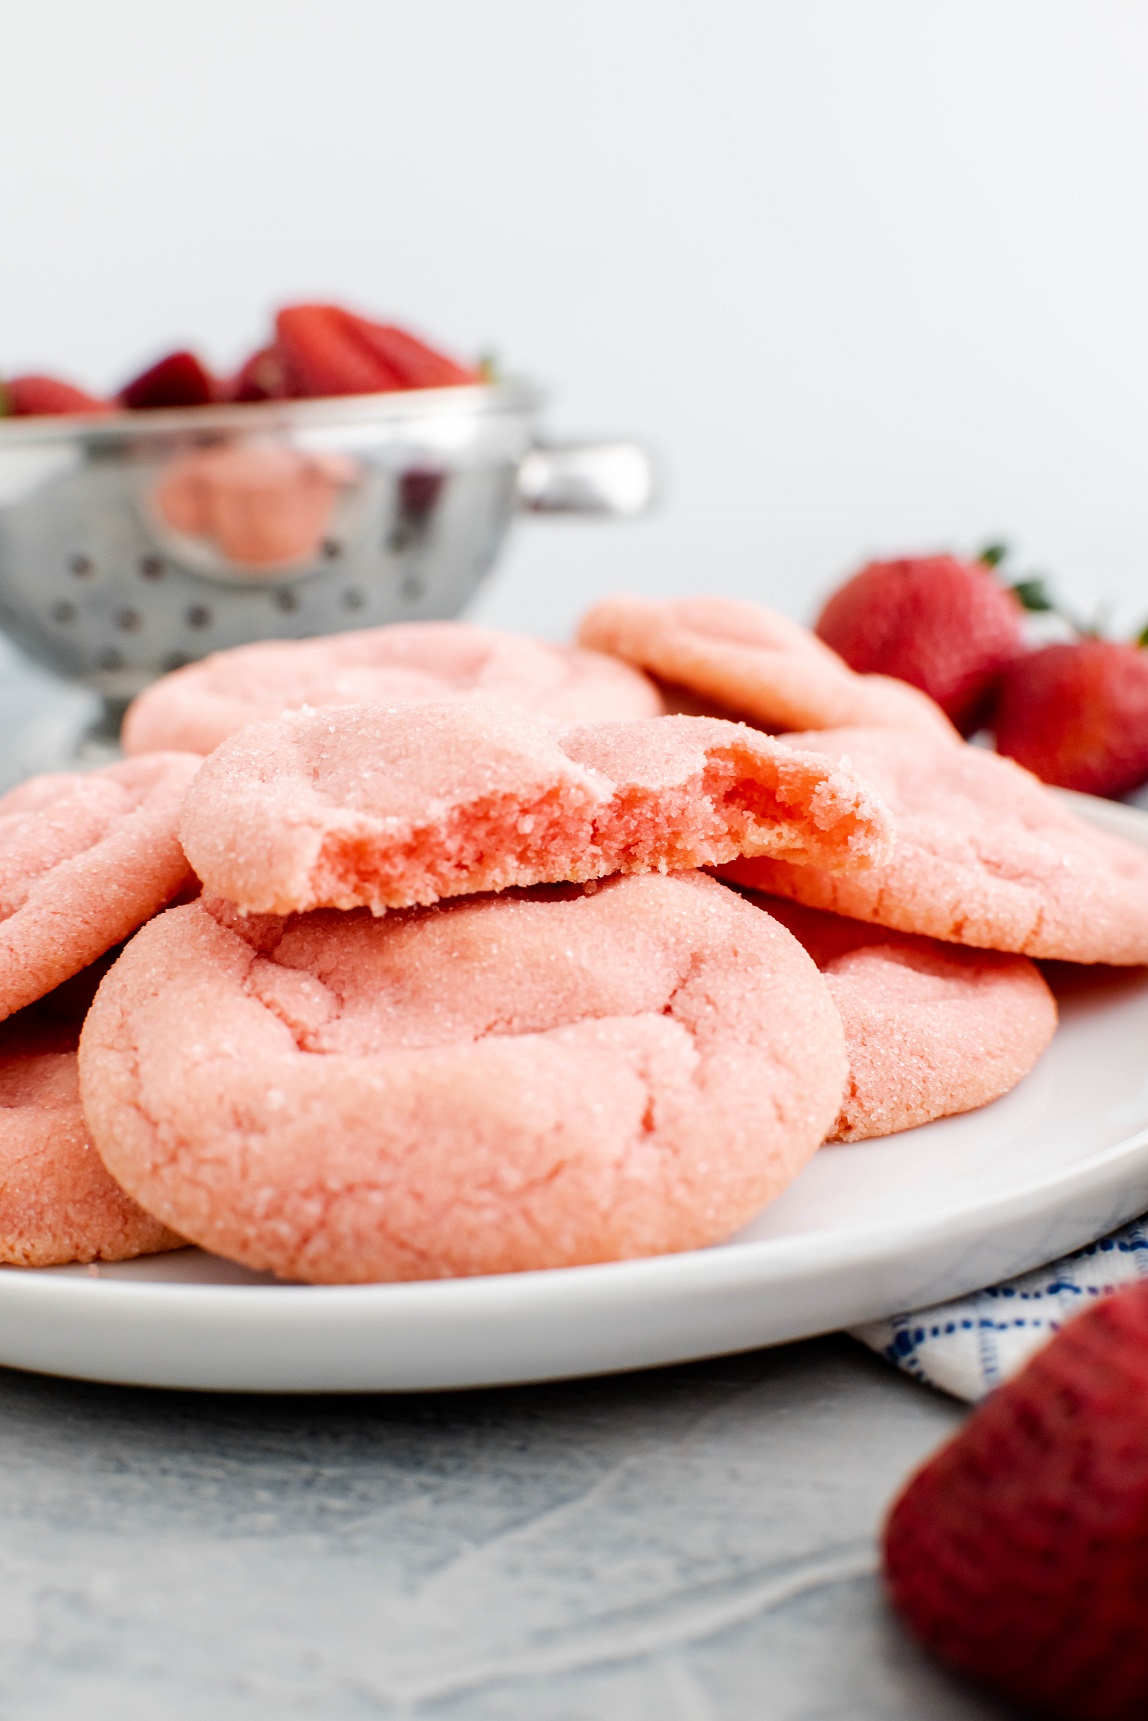 Plate of strawberry sugar cookies. One broken in half to show the pretty pink color inside.